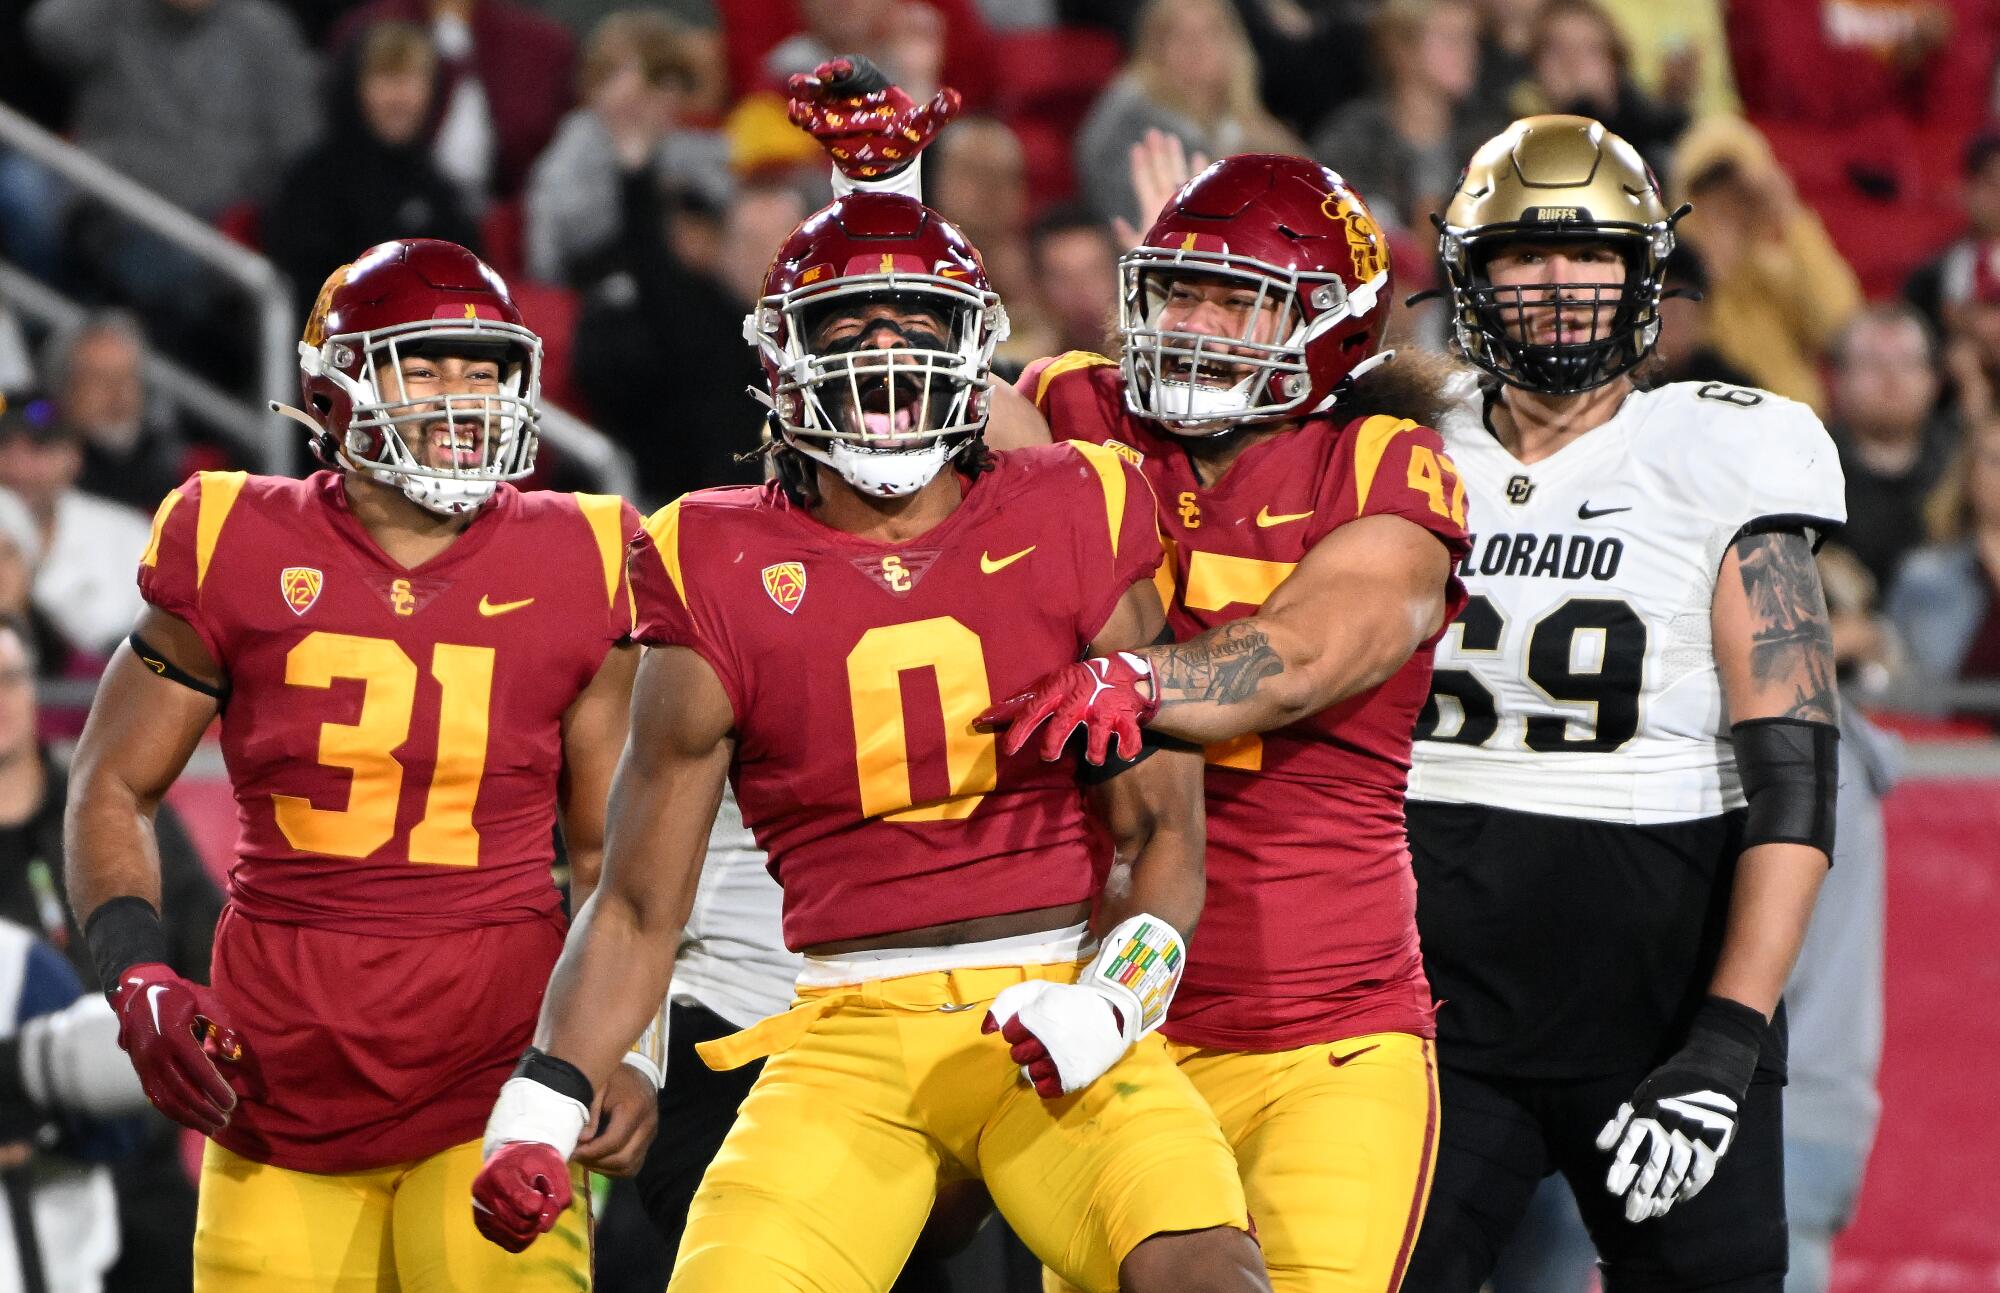 USC's Korey Foreman celebrates his tackle for a loss with Tyrone Talent and Stanley Taufo'ou against Colorado.